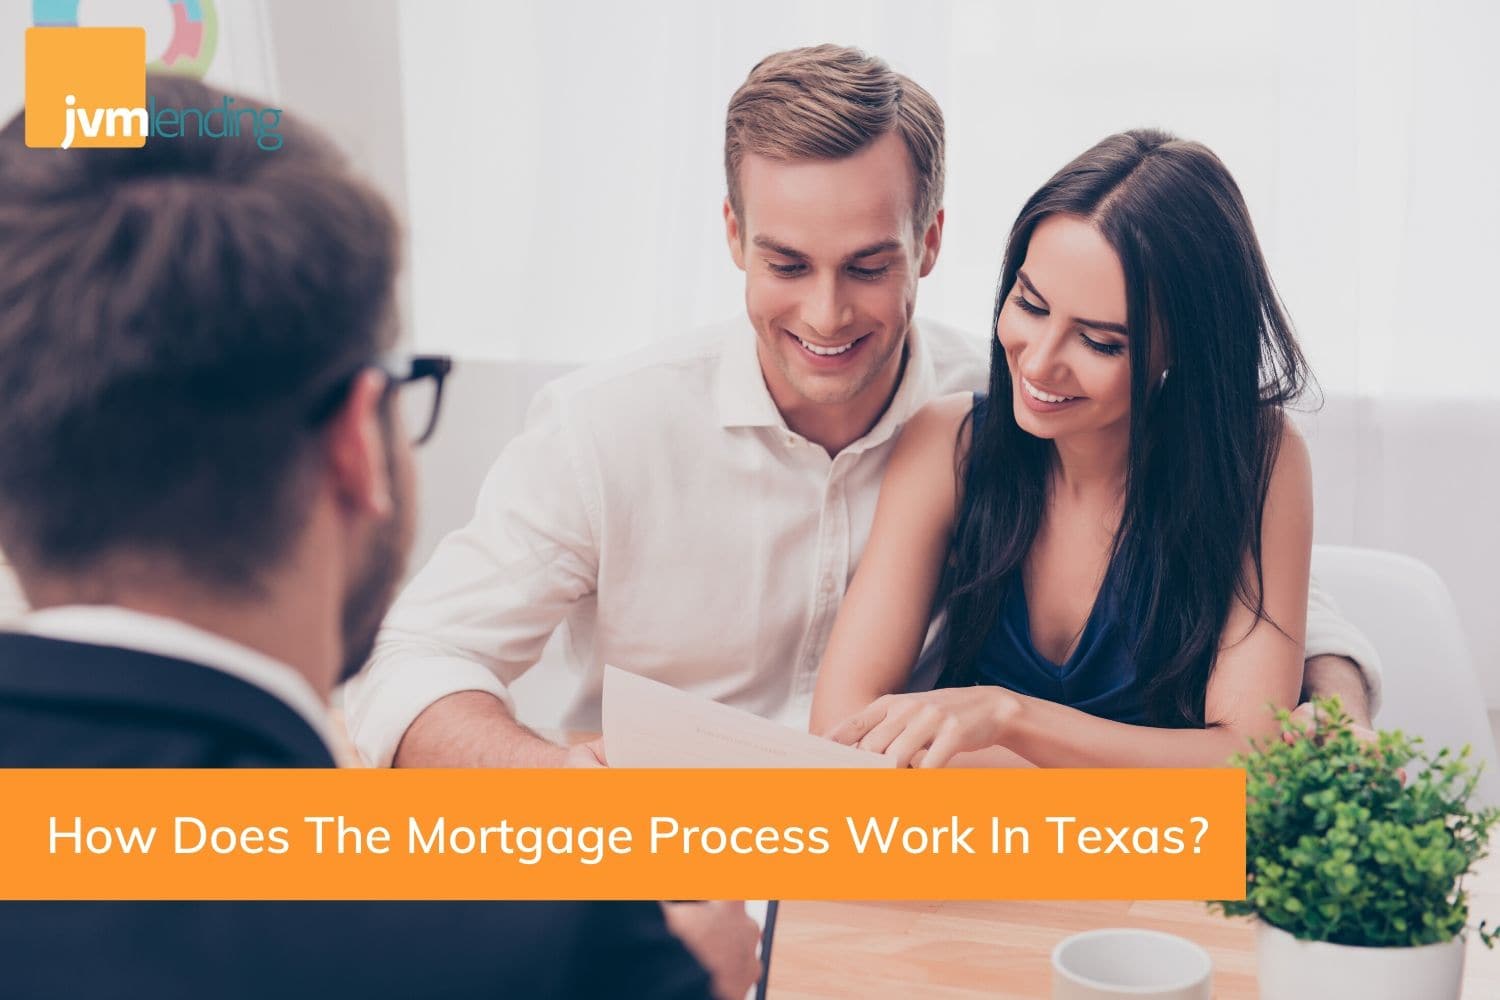 Many homebuyers want to know how the mortgage process works in Texas. A major part of the mortgage process is the closing process.